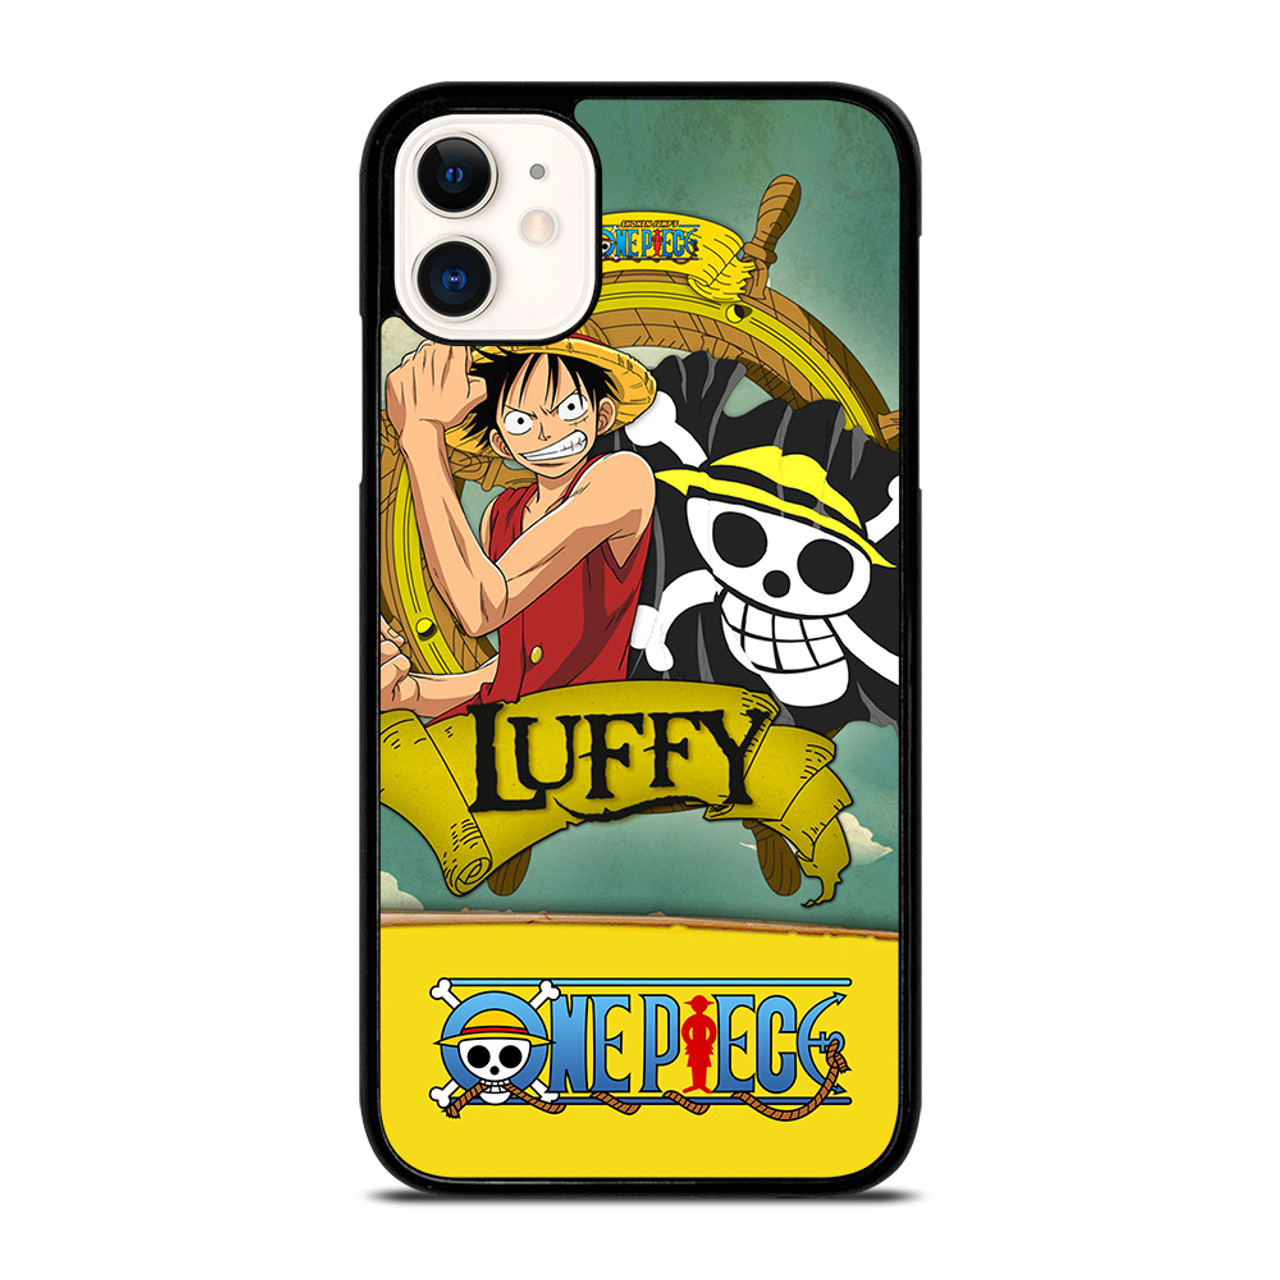 https://cdn11.bigcommerce.com/s-9chjulhvl5/images/stencil/1280x1280/products/60203/55349/LUFFY%20ONE%20PIECE__30993.1634366794.jpg?c=1